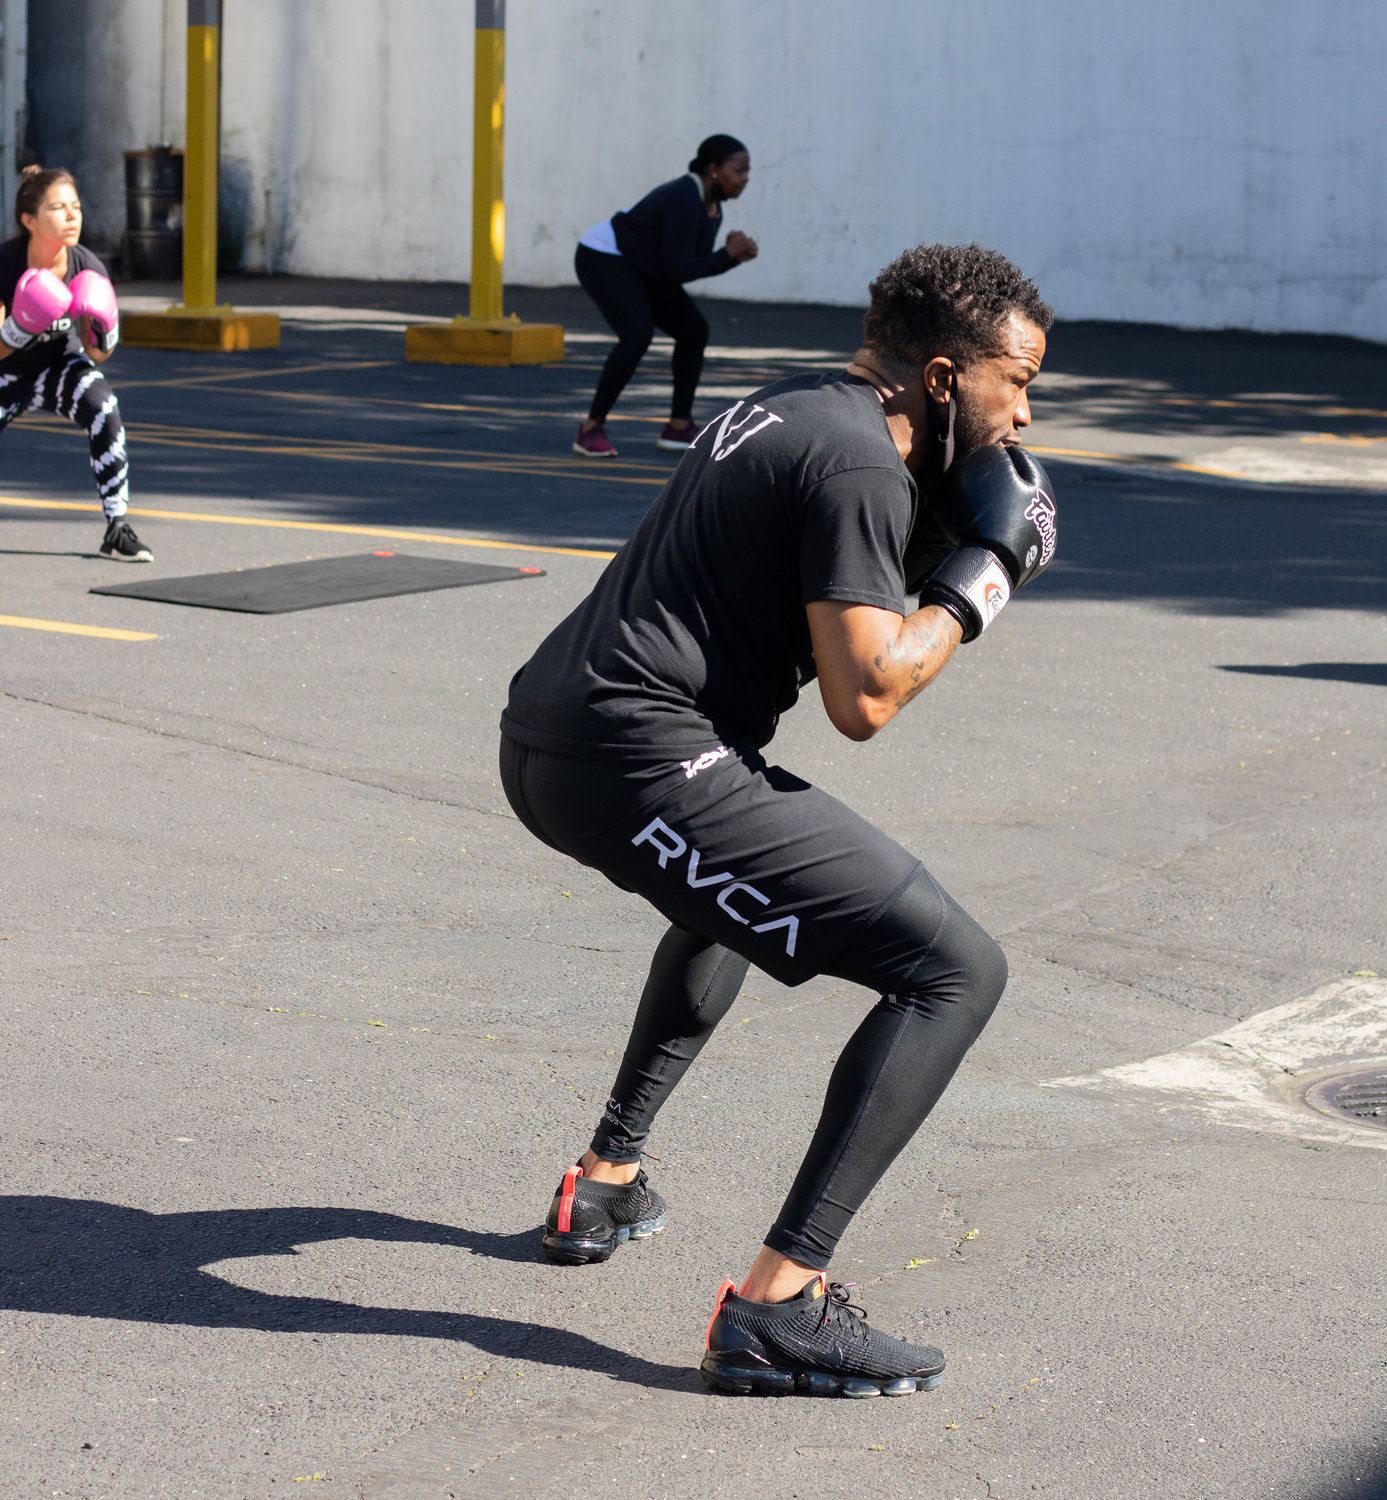 With the advent of warm weather, Melo was able to restart her in-person classes outdoors.